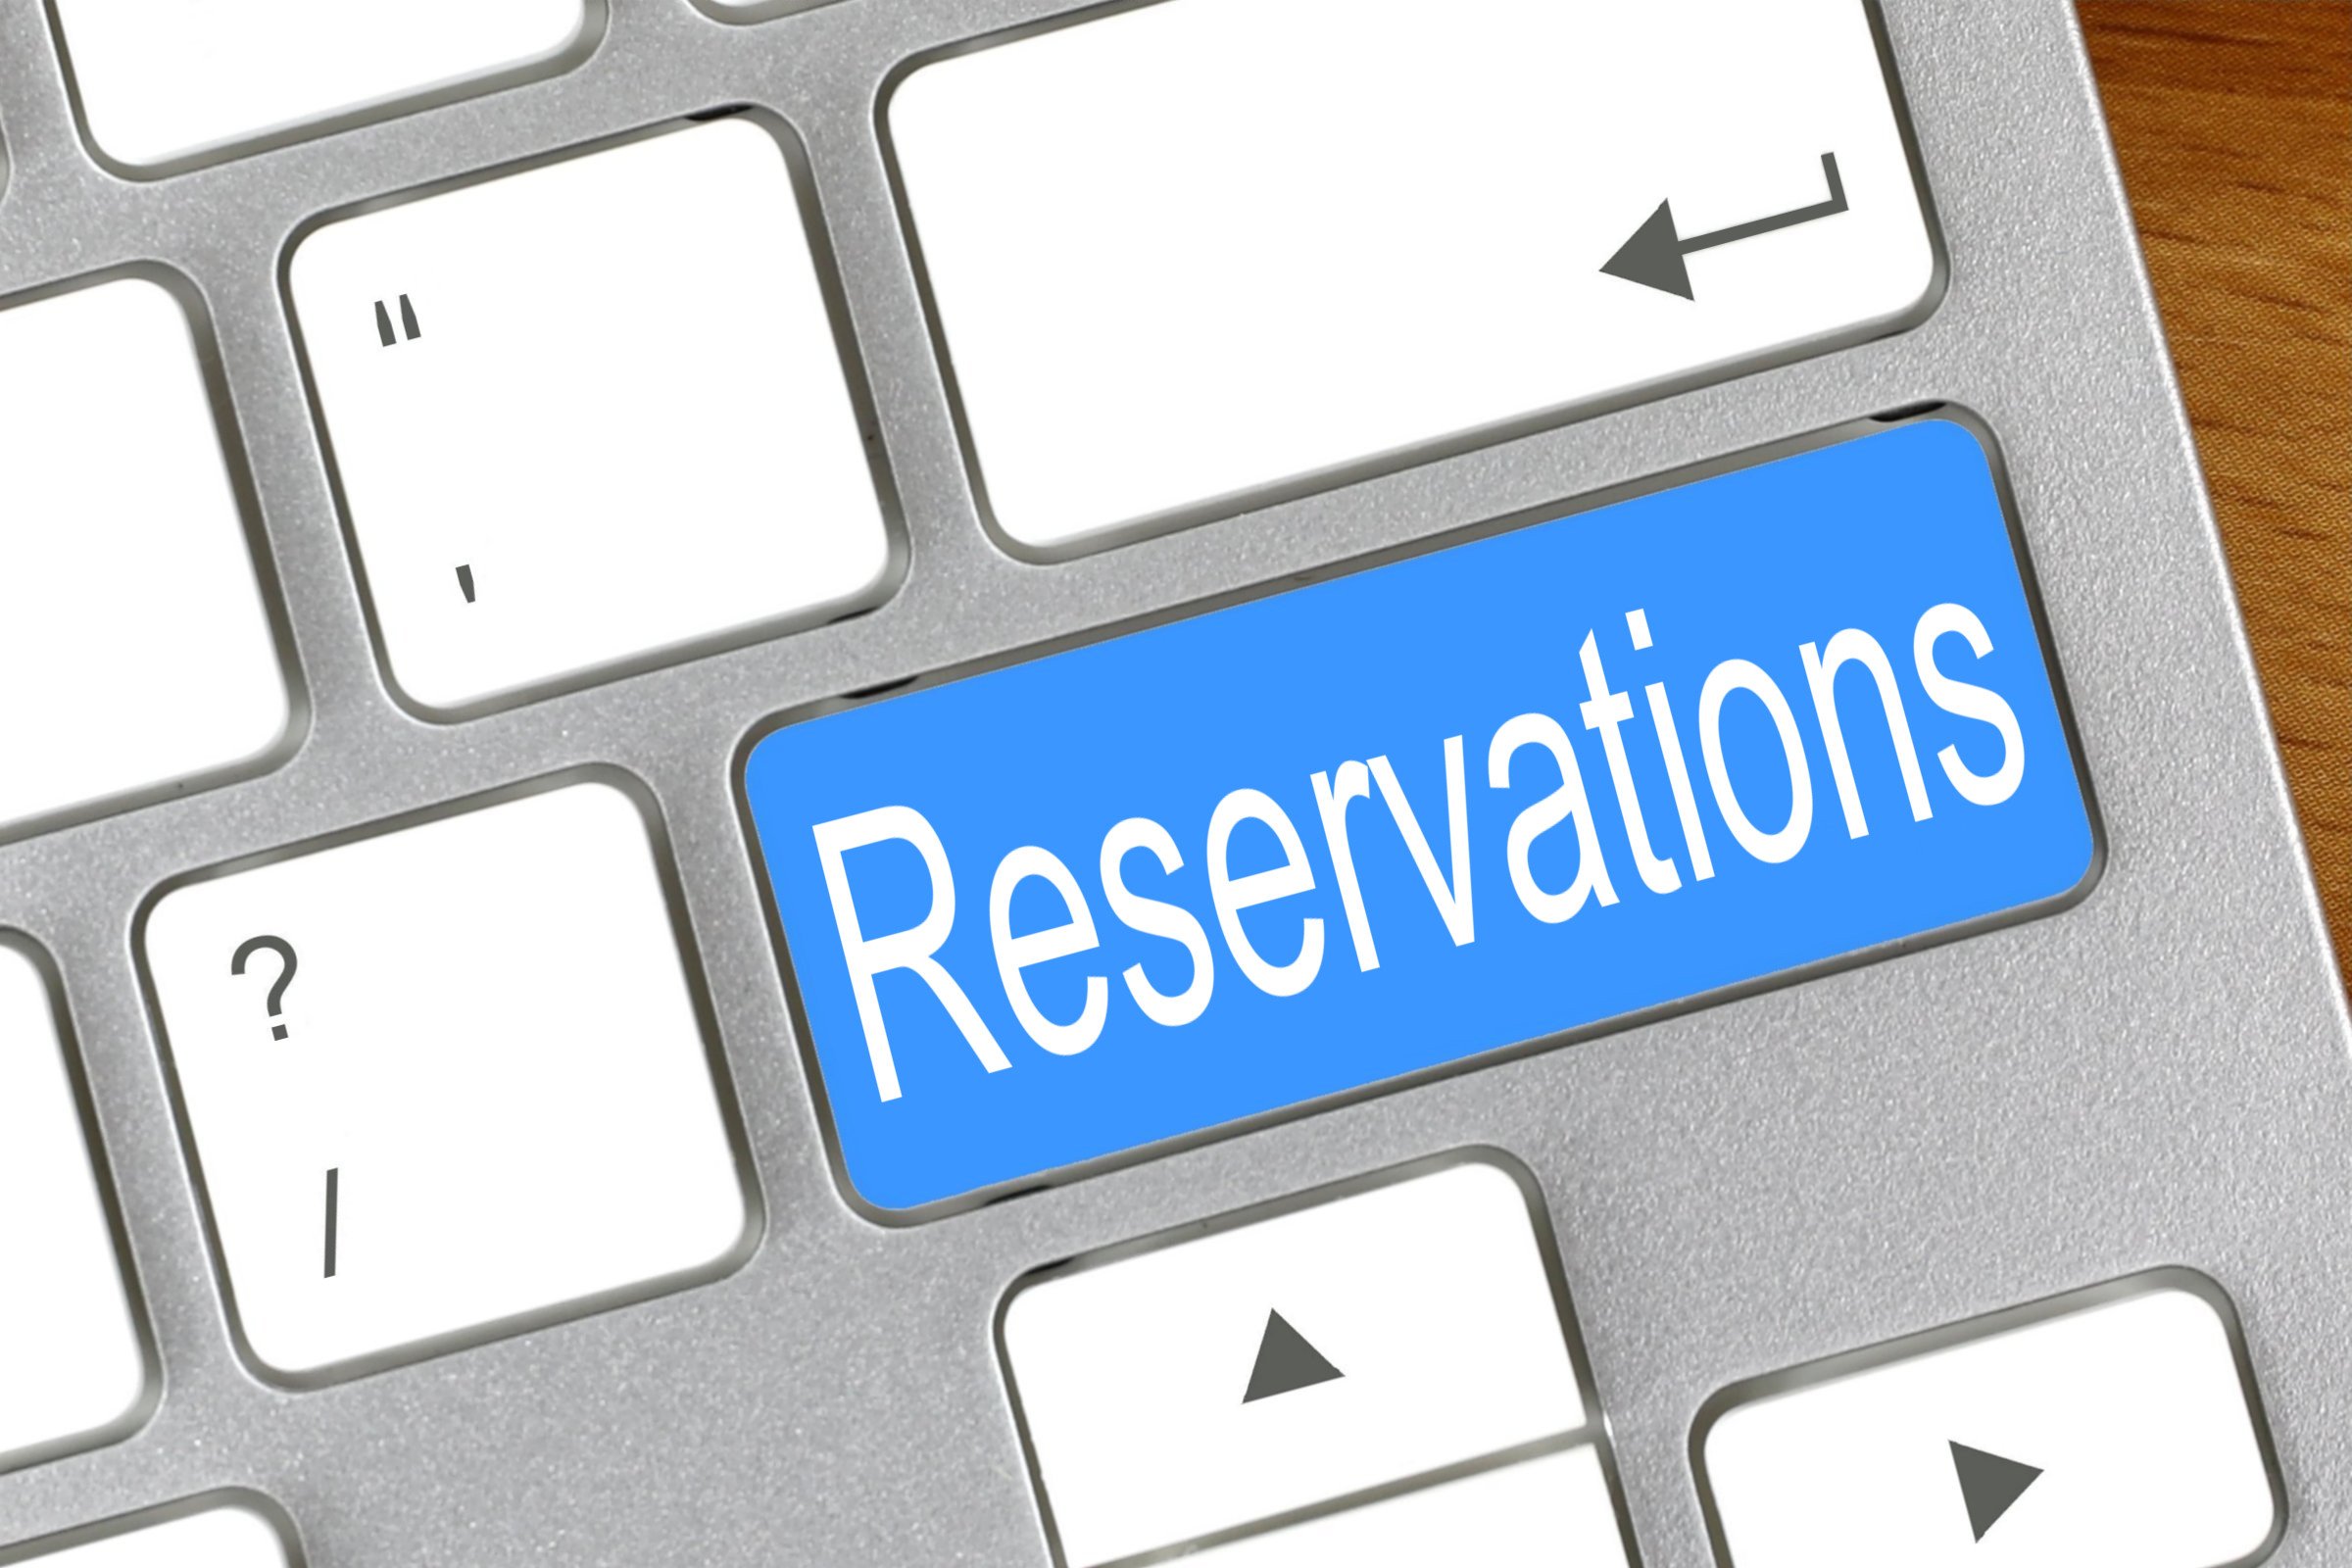 reservations